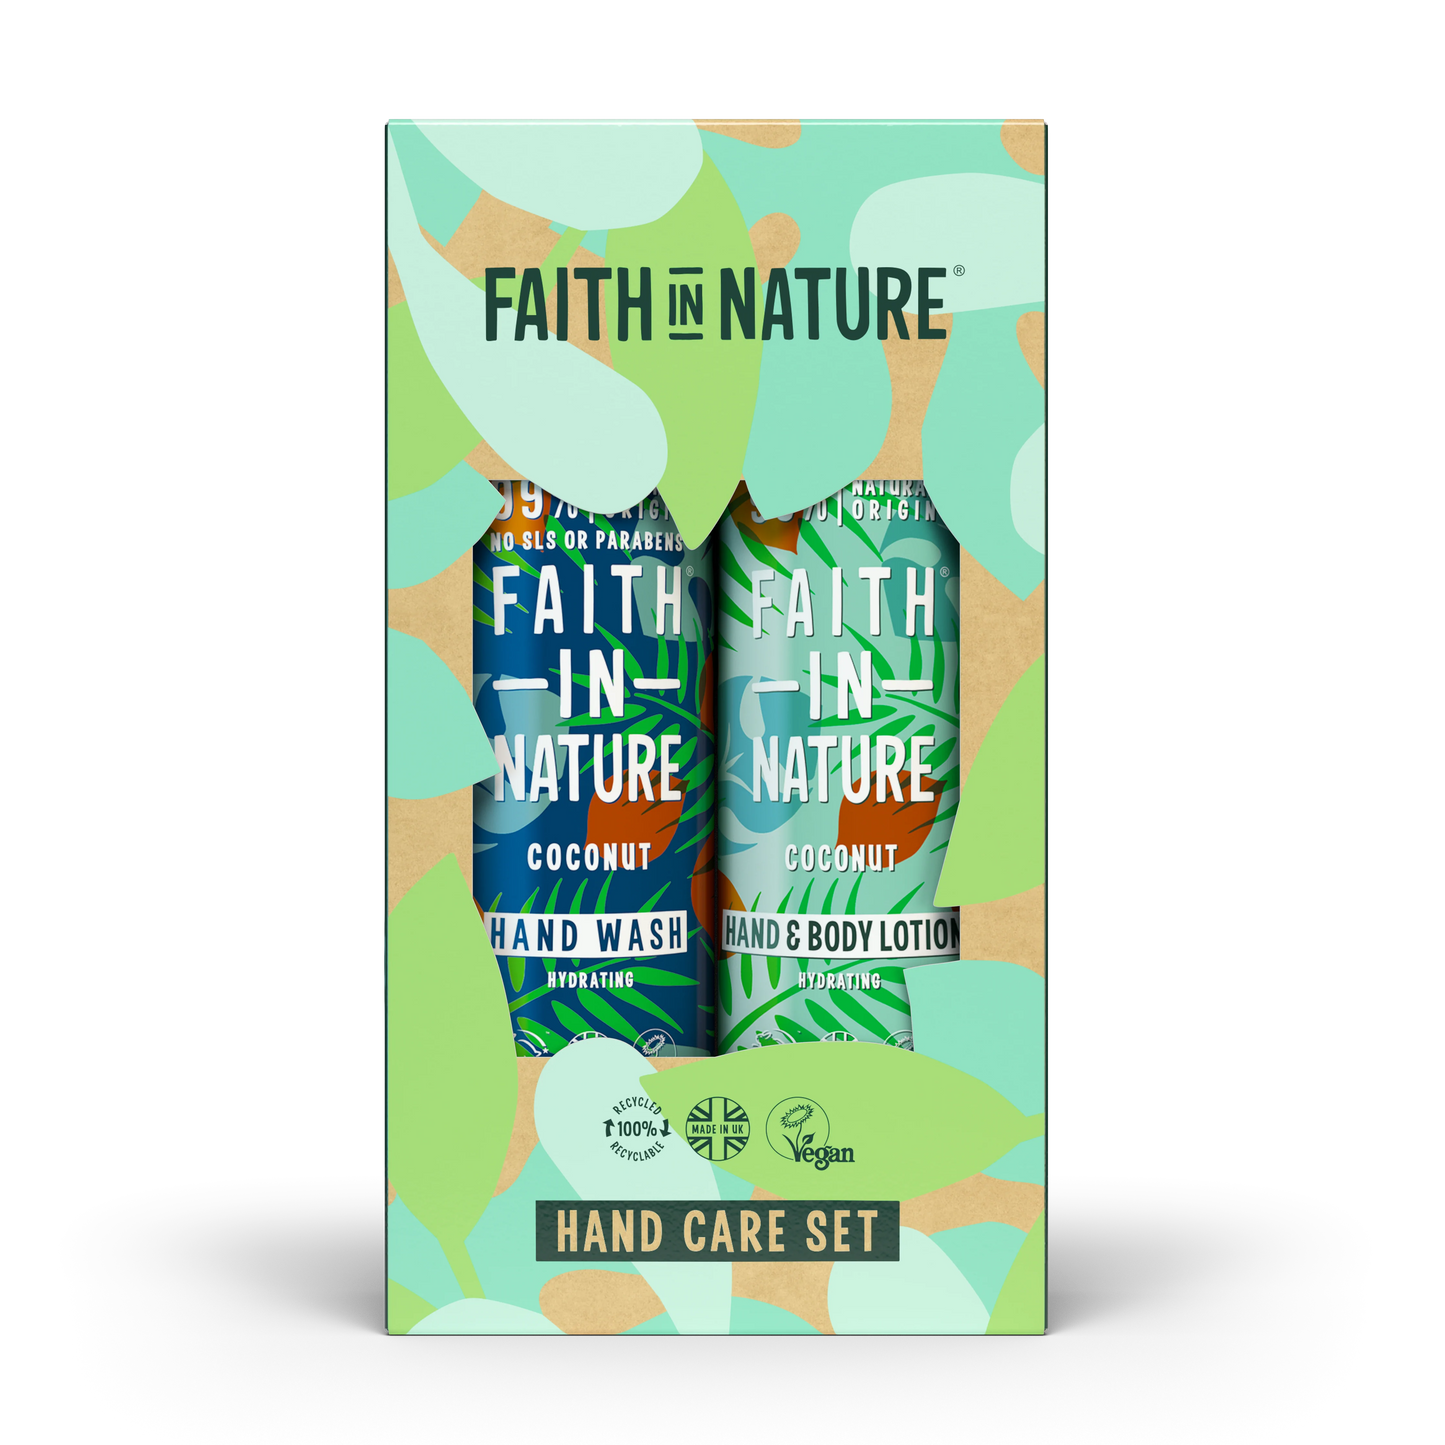 Faith in Nature Hand Care Set - Coconut Hand Wash and Hand & Body Lotion 400ml